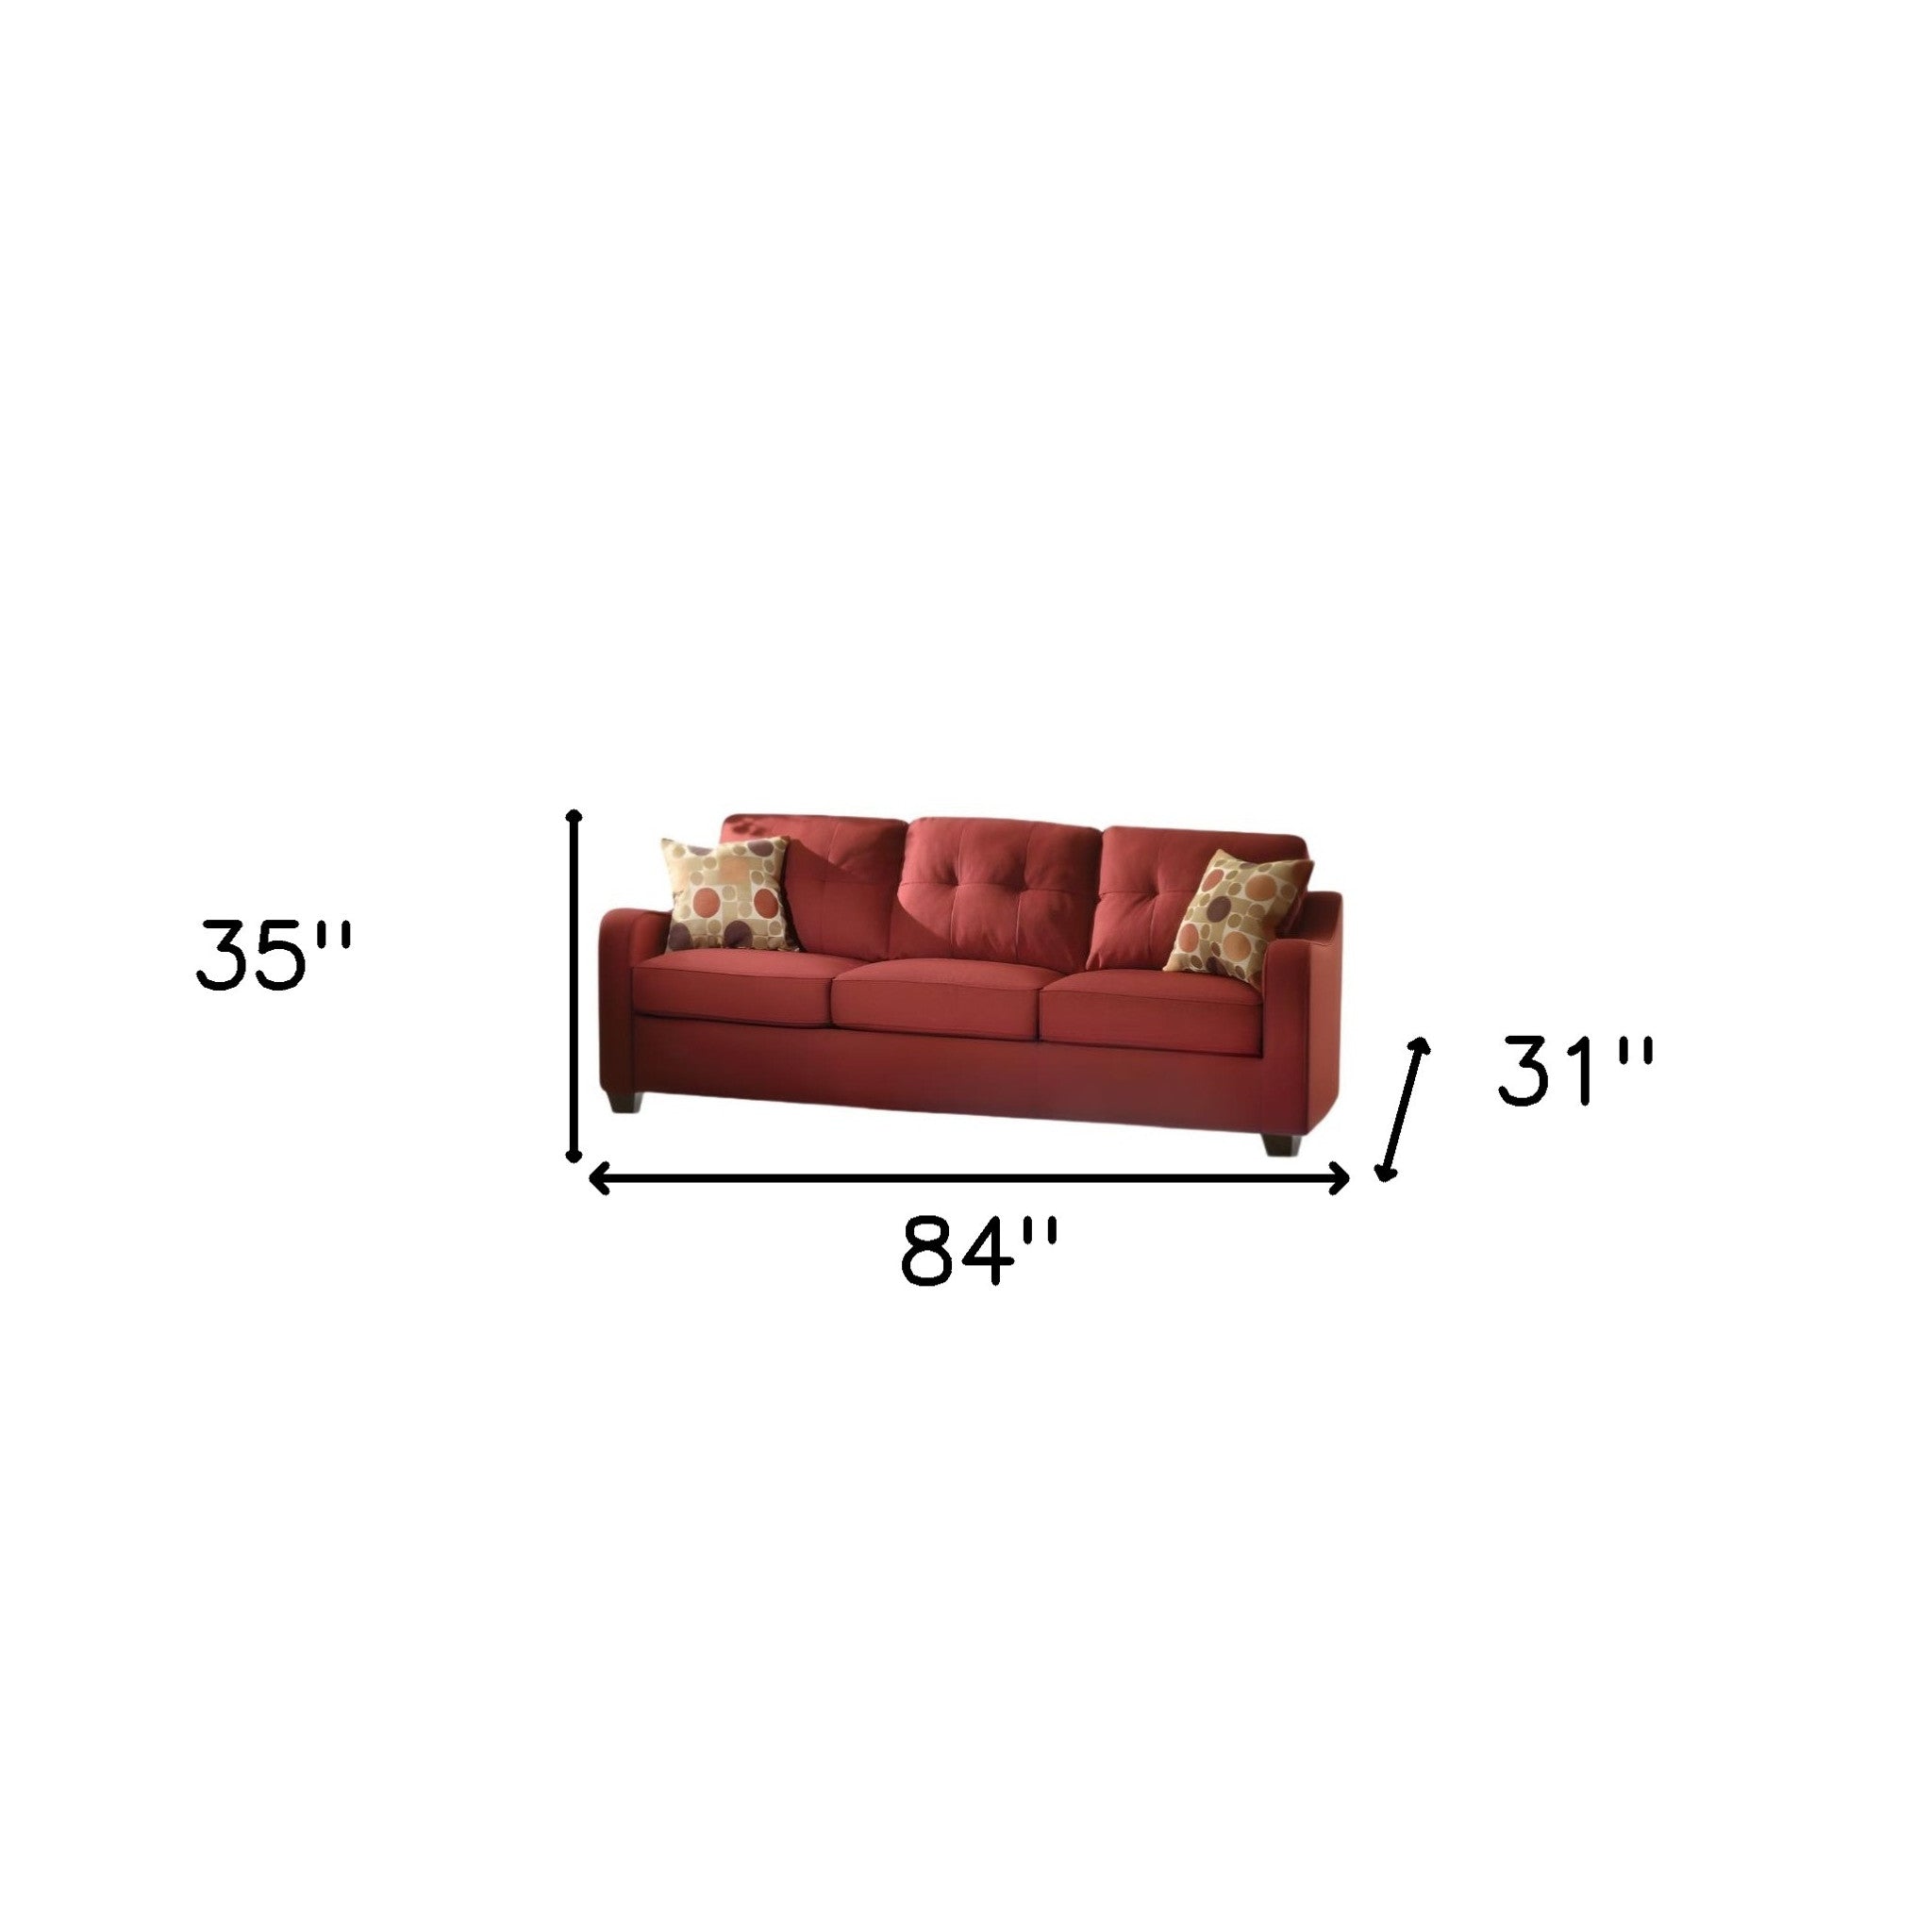 84" Red And Chocolate Linen Sofa And Toss Pillows